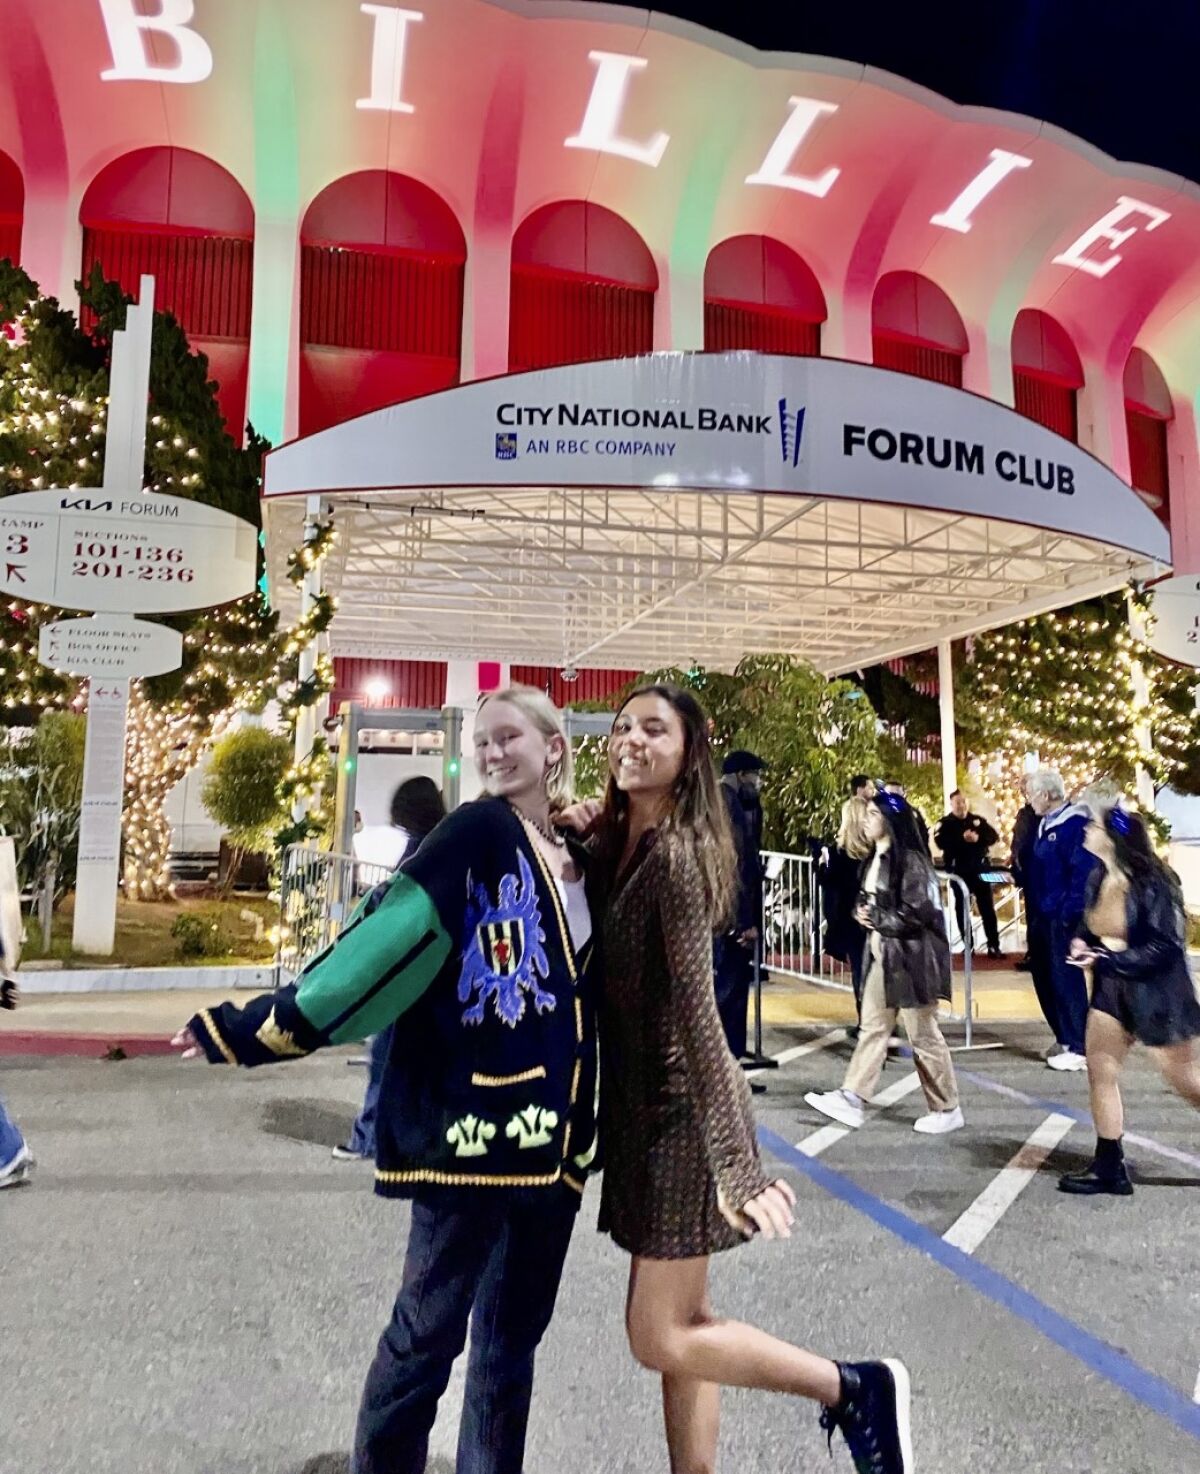 Billie Eilish invited Ryan Berberet (left) and Sydney Kroonen to attend her concert at the L.A. Kia Forum in December.